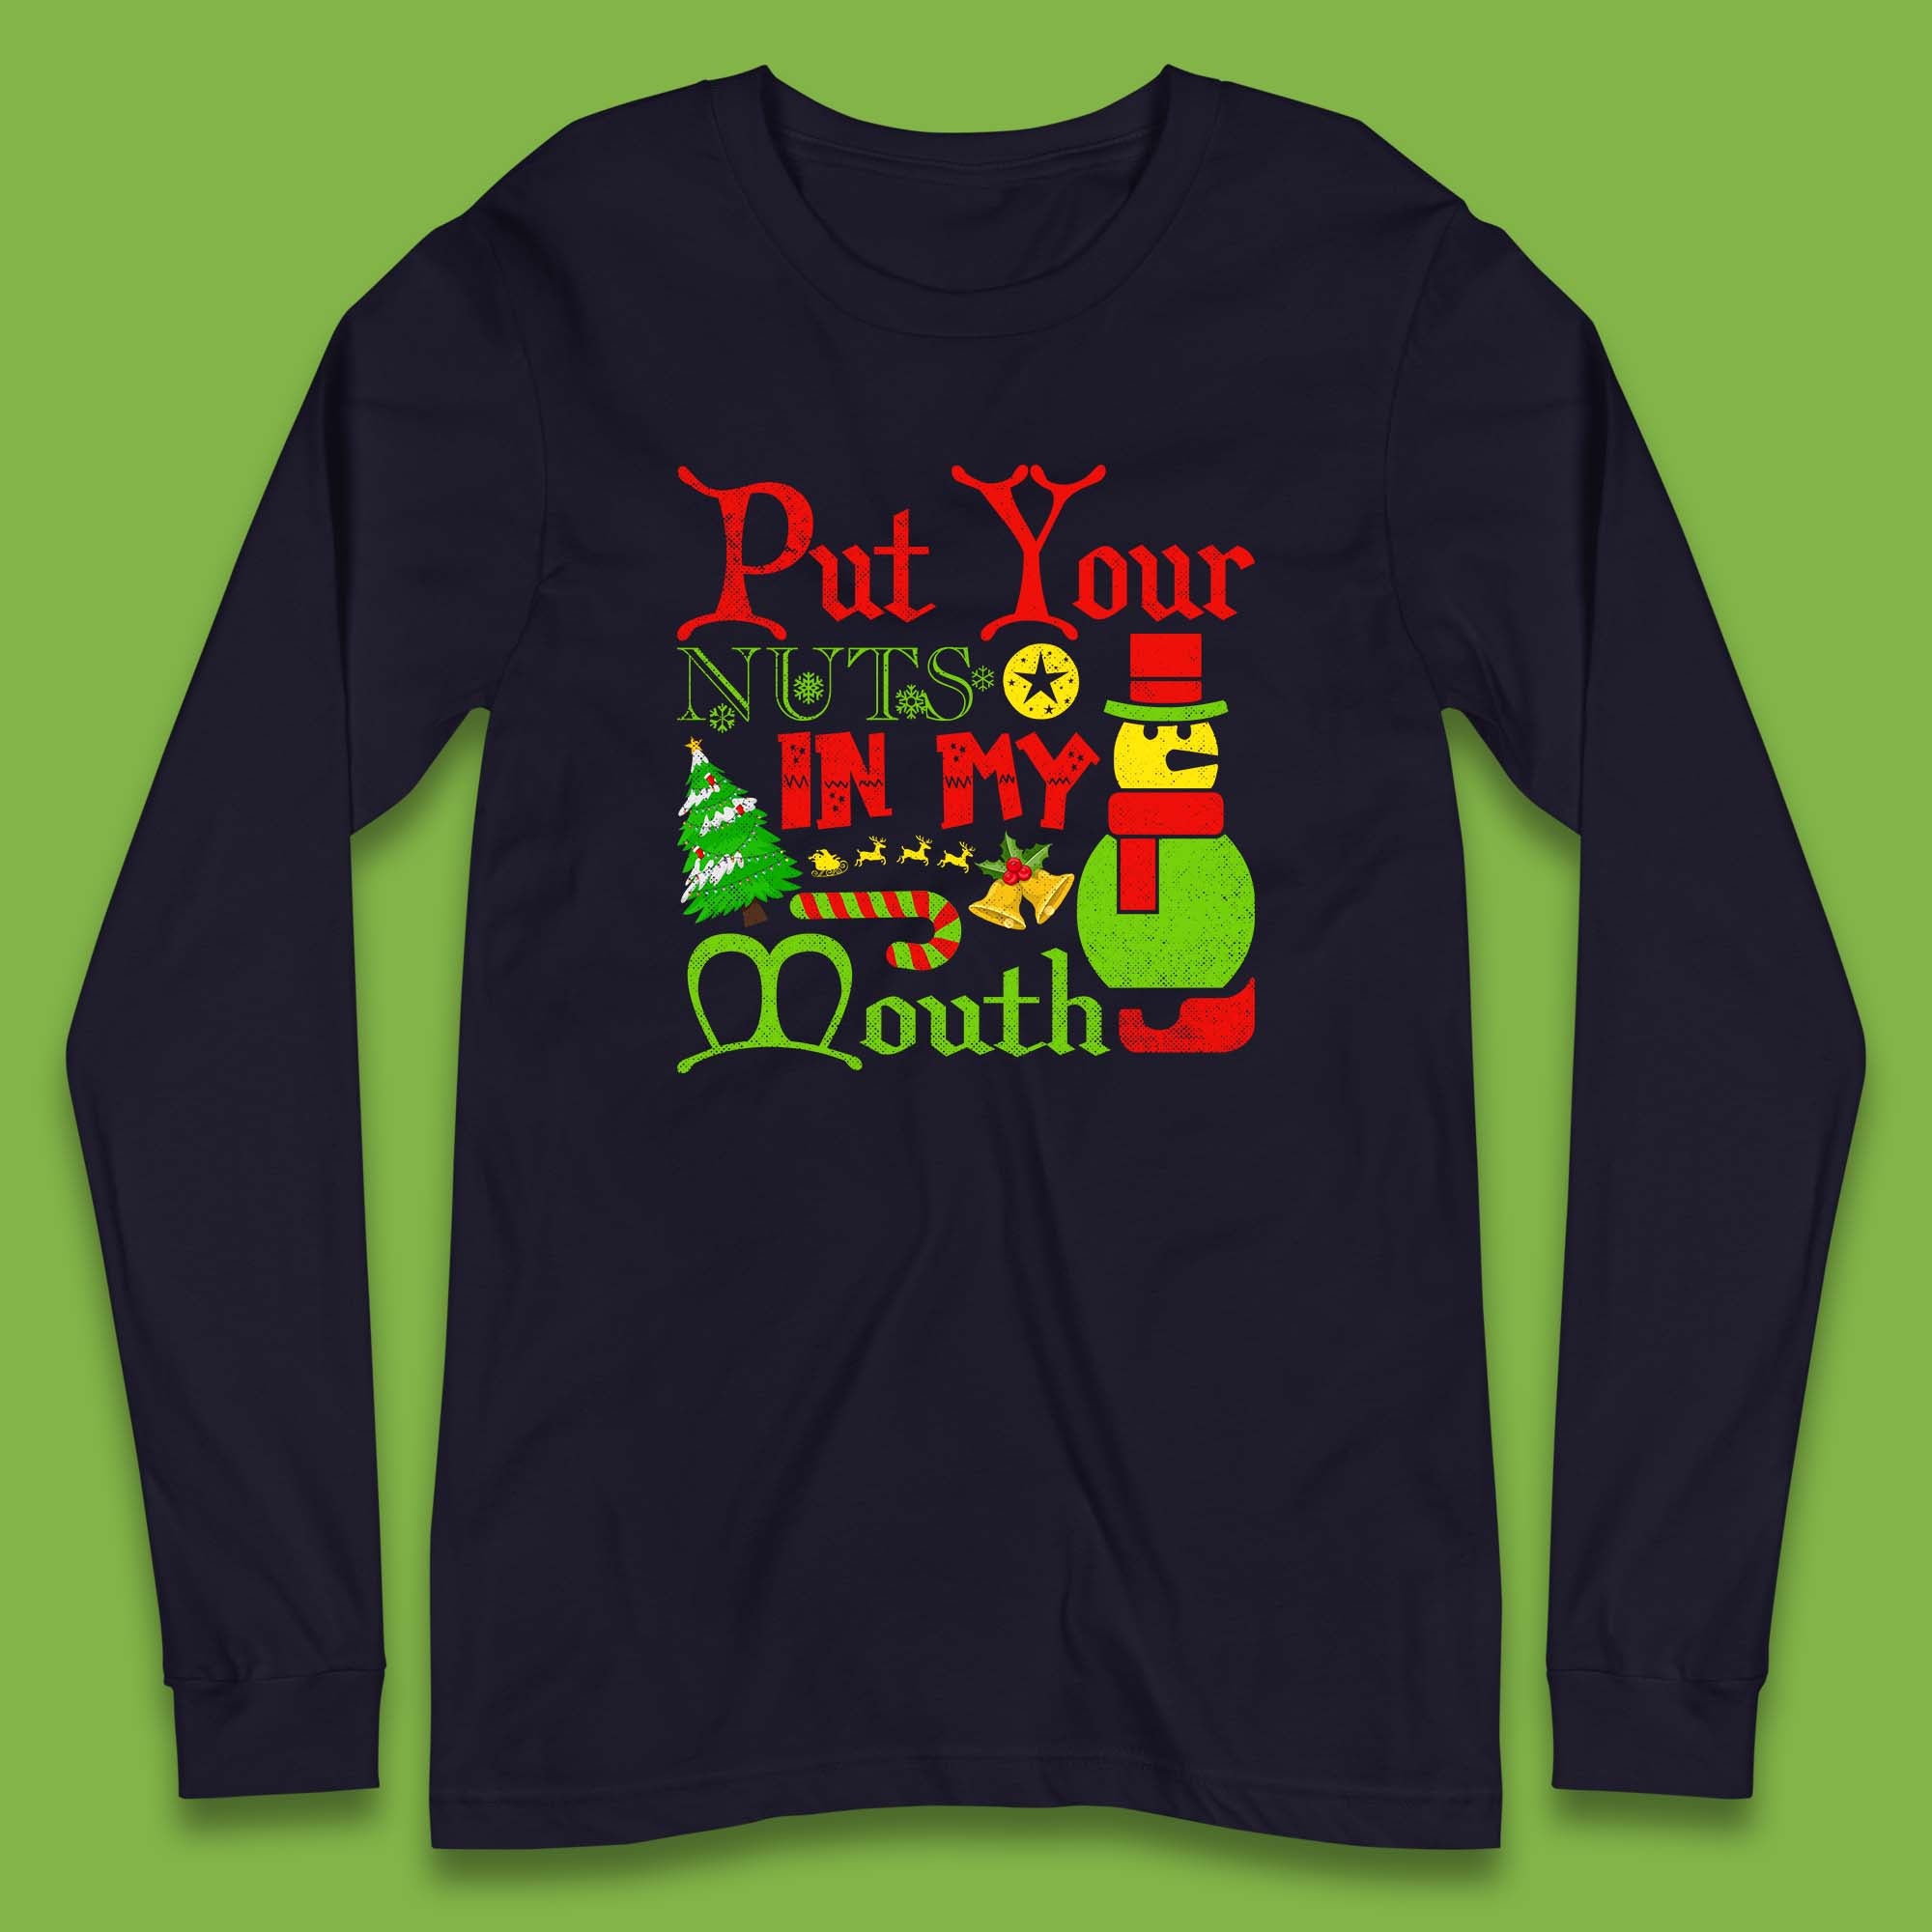 Put Your Nuts In My Mouth Funny Christmas Holiday Humor Offensive Xmas Rude Joke Long Sleeve T Shirt